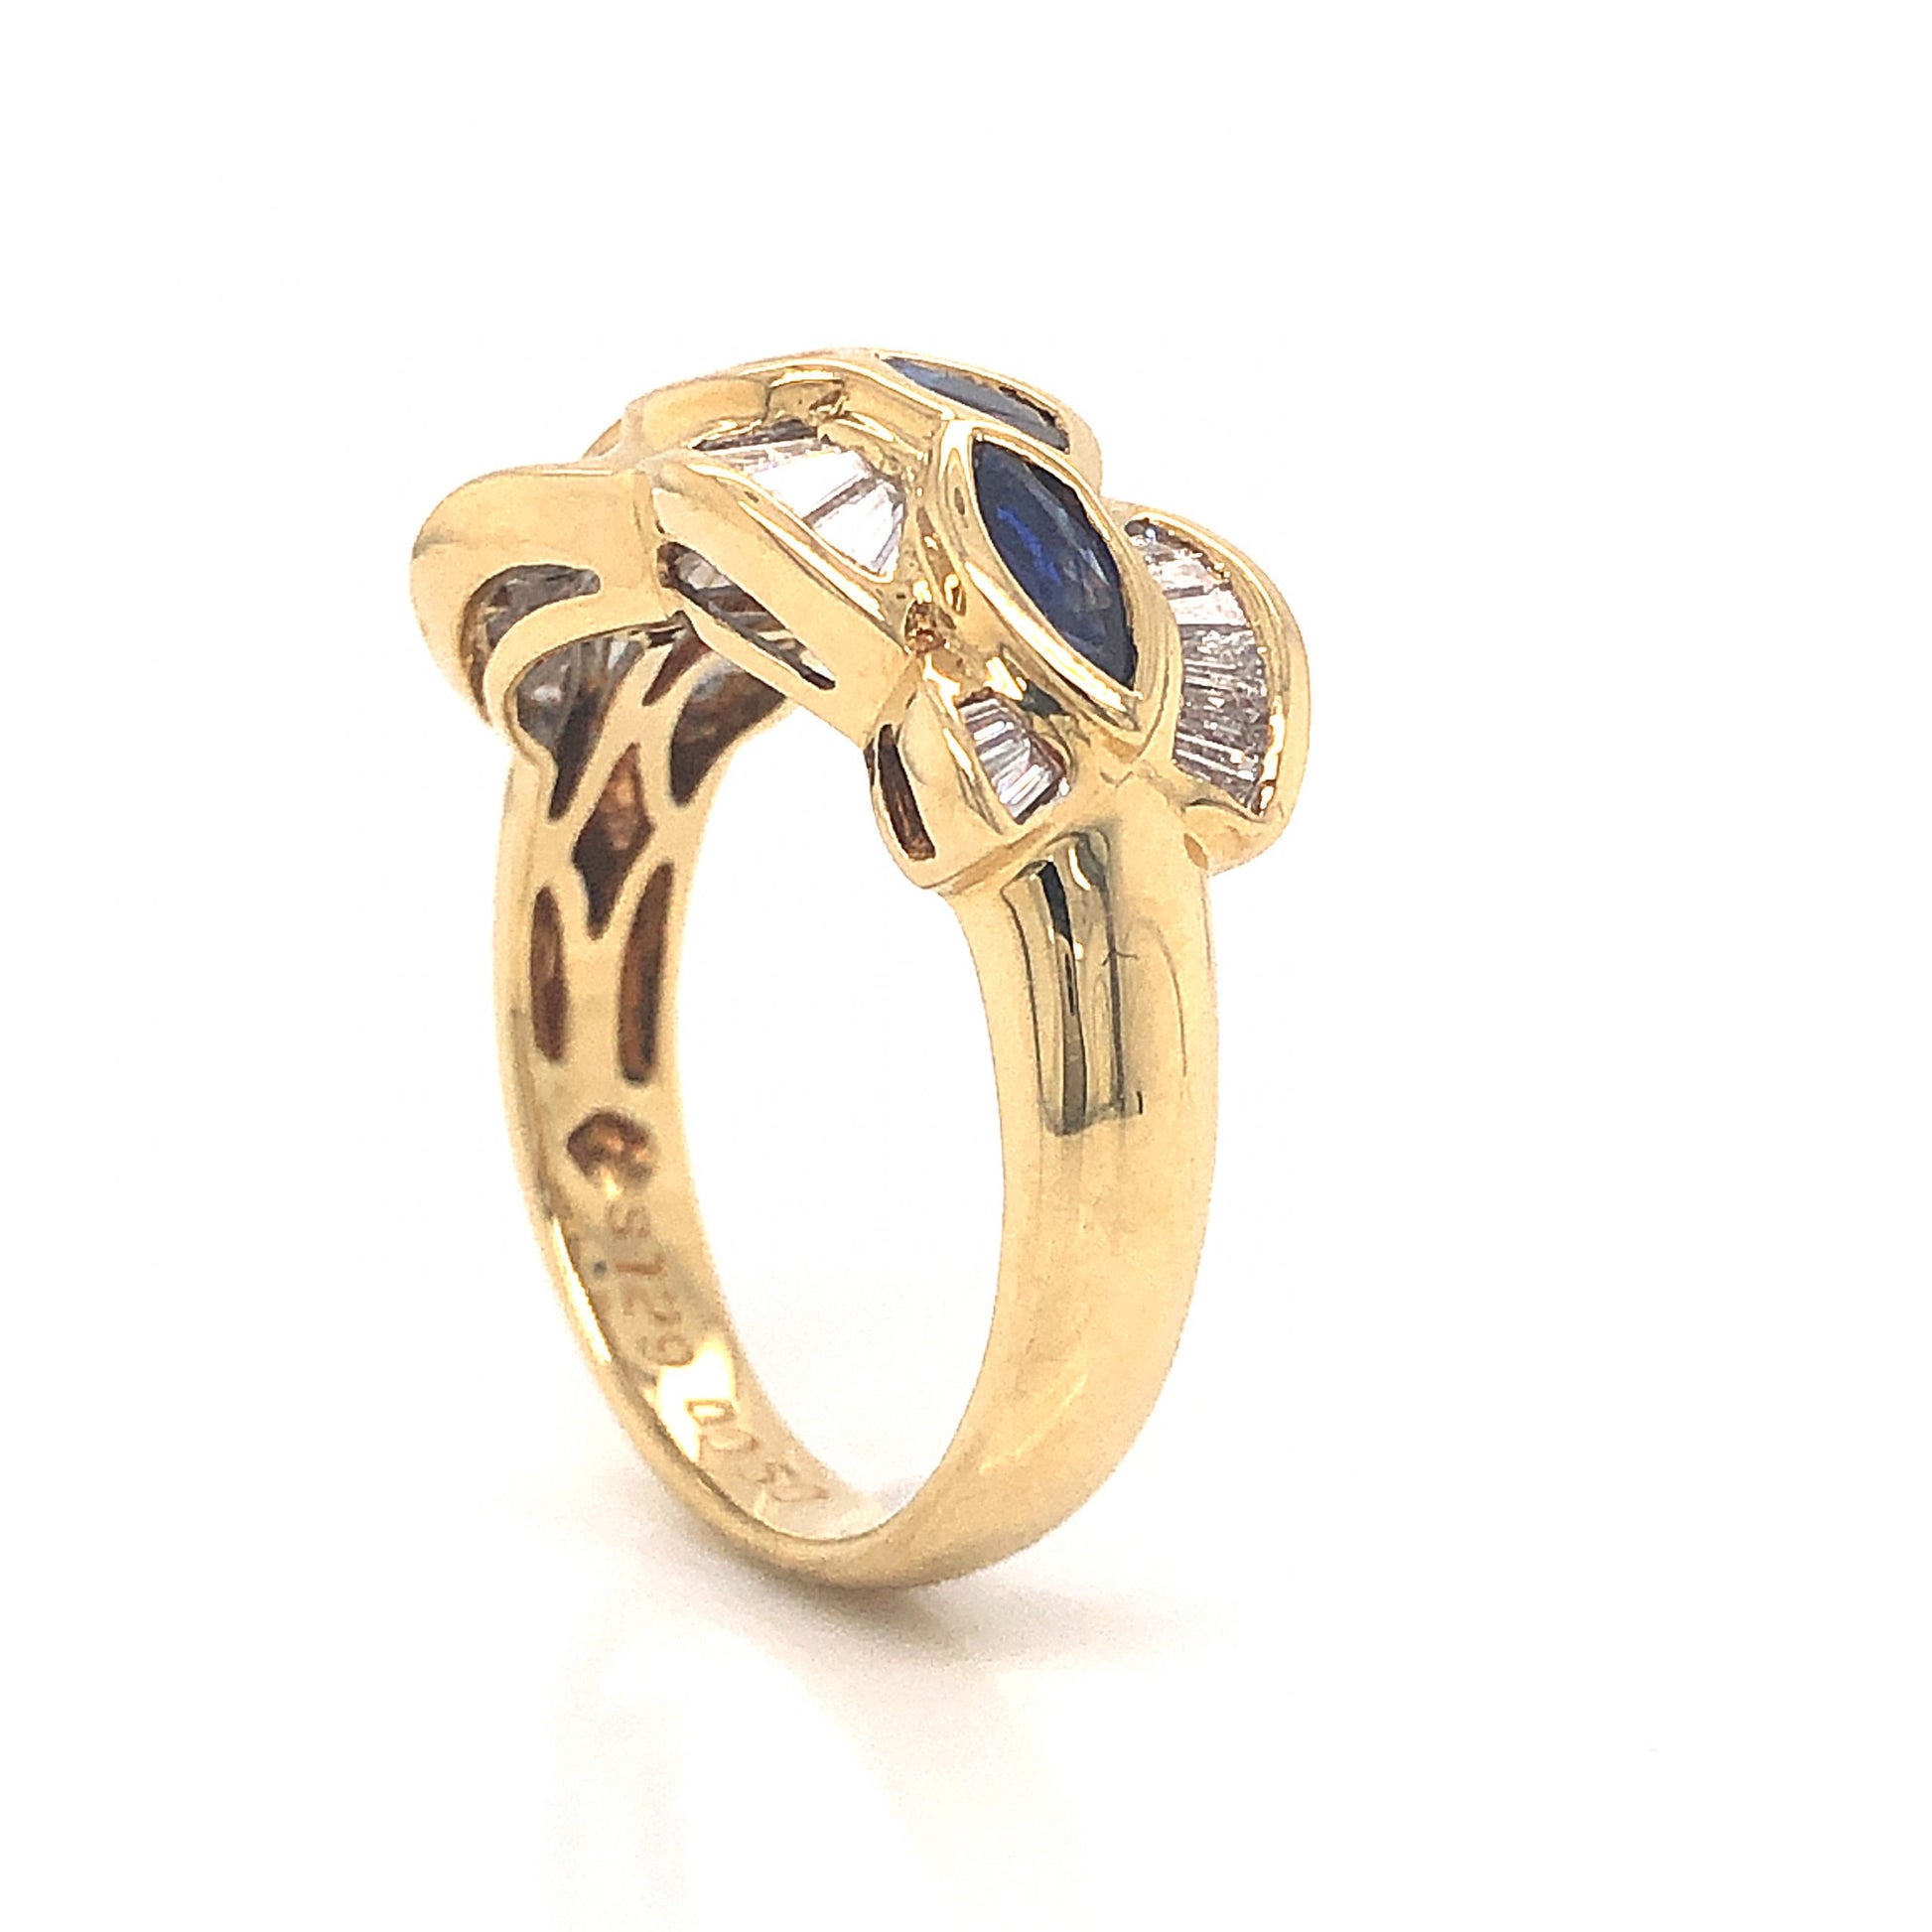 Sapphire & Diamond Cluster Cocktail Ring in 18k Yellow GoldComposition: 18 Karat Yellow Gold Ring Size: 6.5 Total Diamond Weight: .50ct Total Gram Weight: 6.2 g Inscription: S1.29 D0.50 K18
      